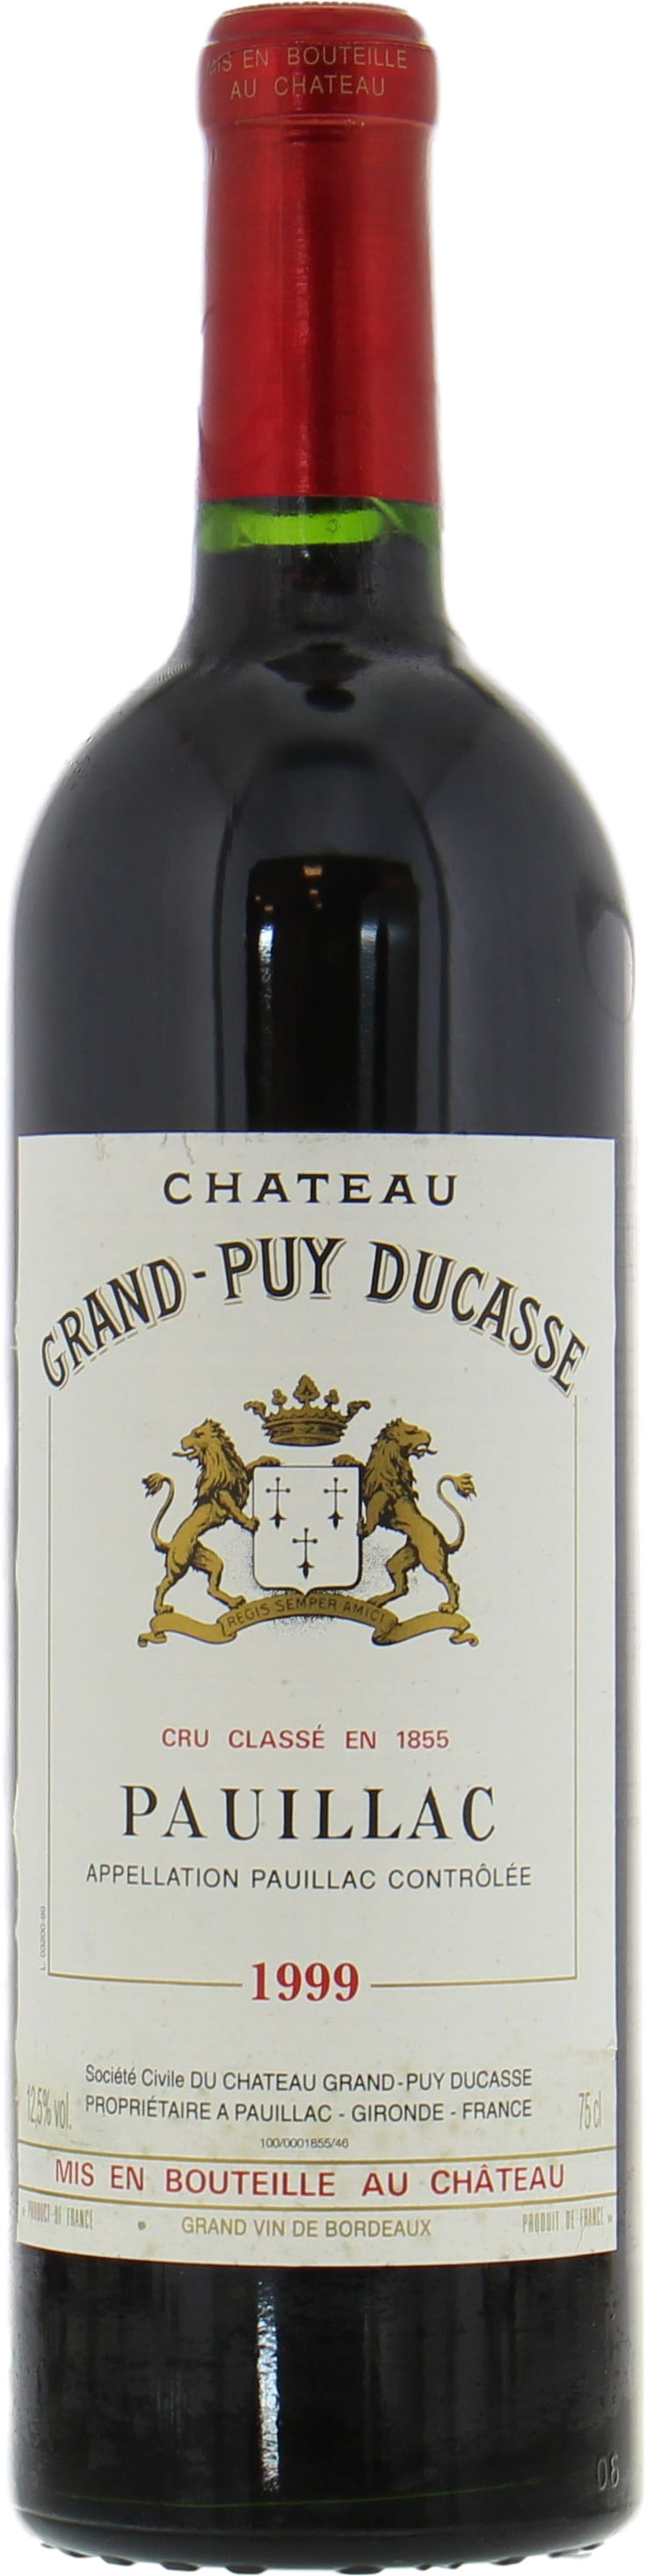 Chateau Grand Puy Ducasse - Chateau Grand Puy Ducasse 1999 Perfect